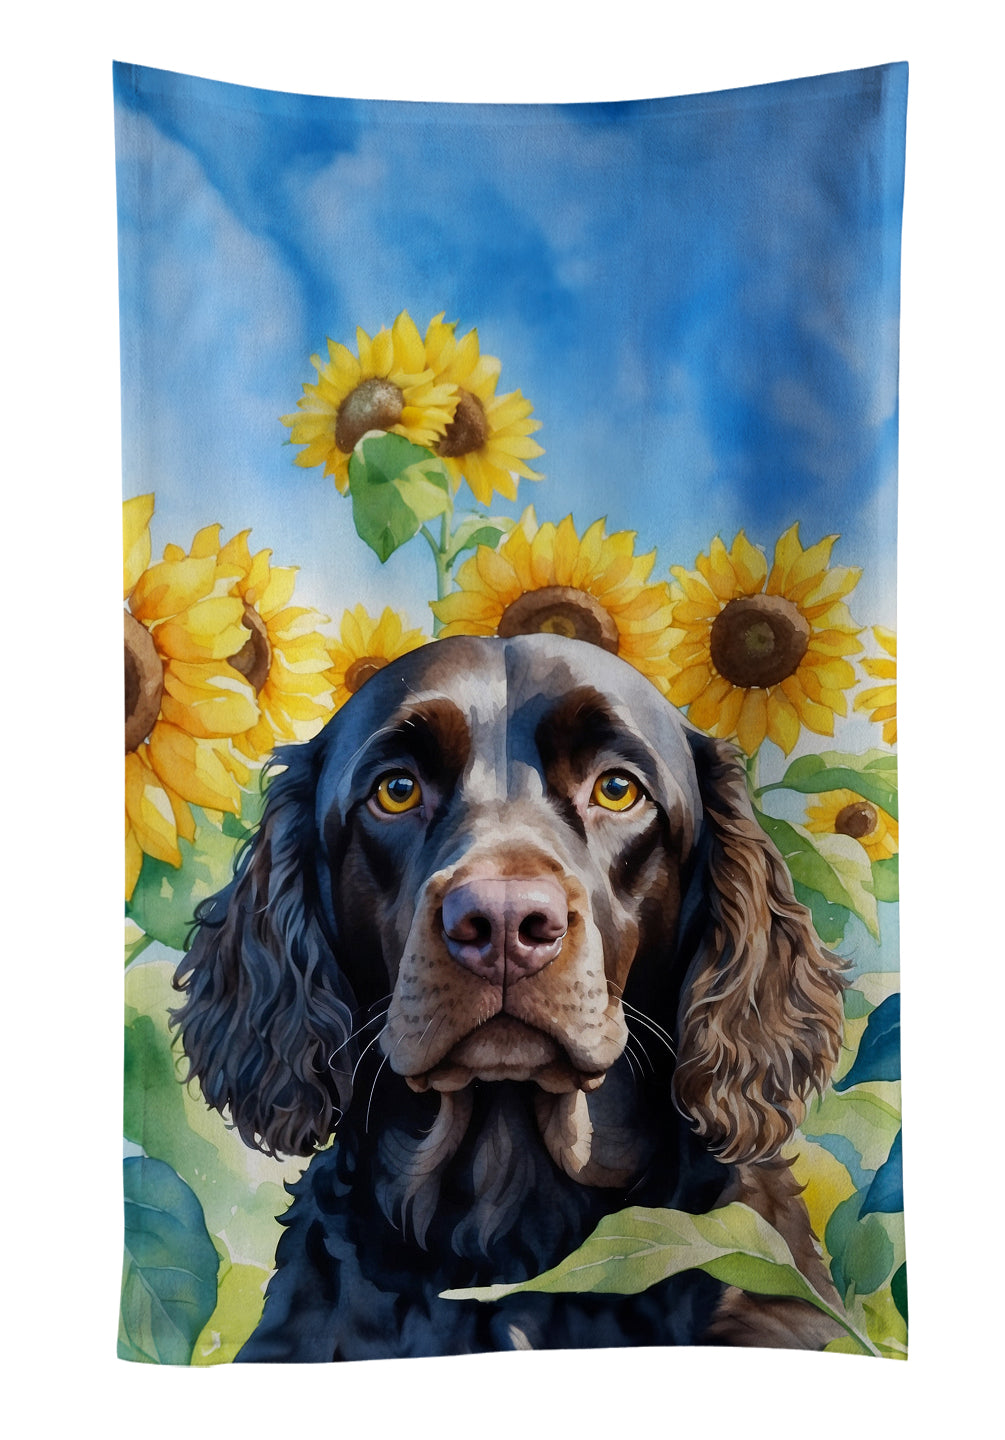 Buy this American Water Spaniel in Sunflowers Kitchen Towel